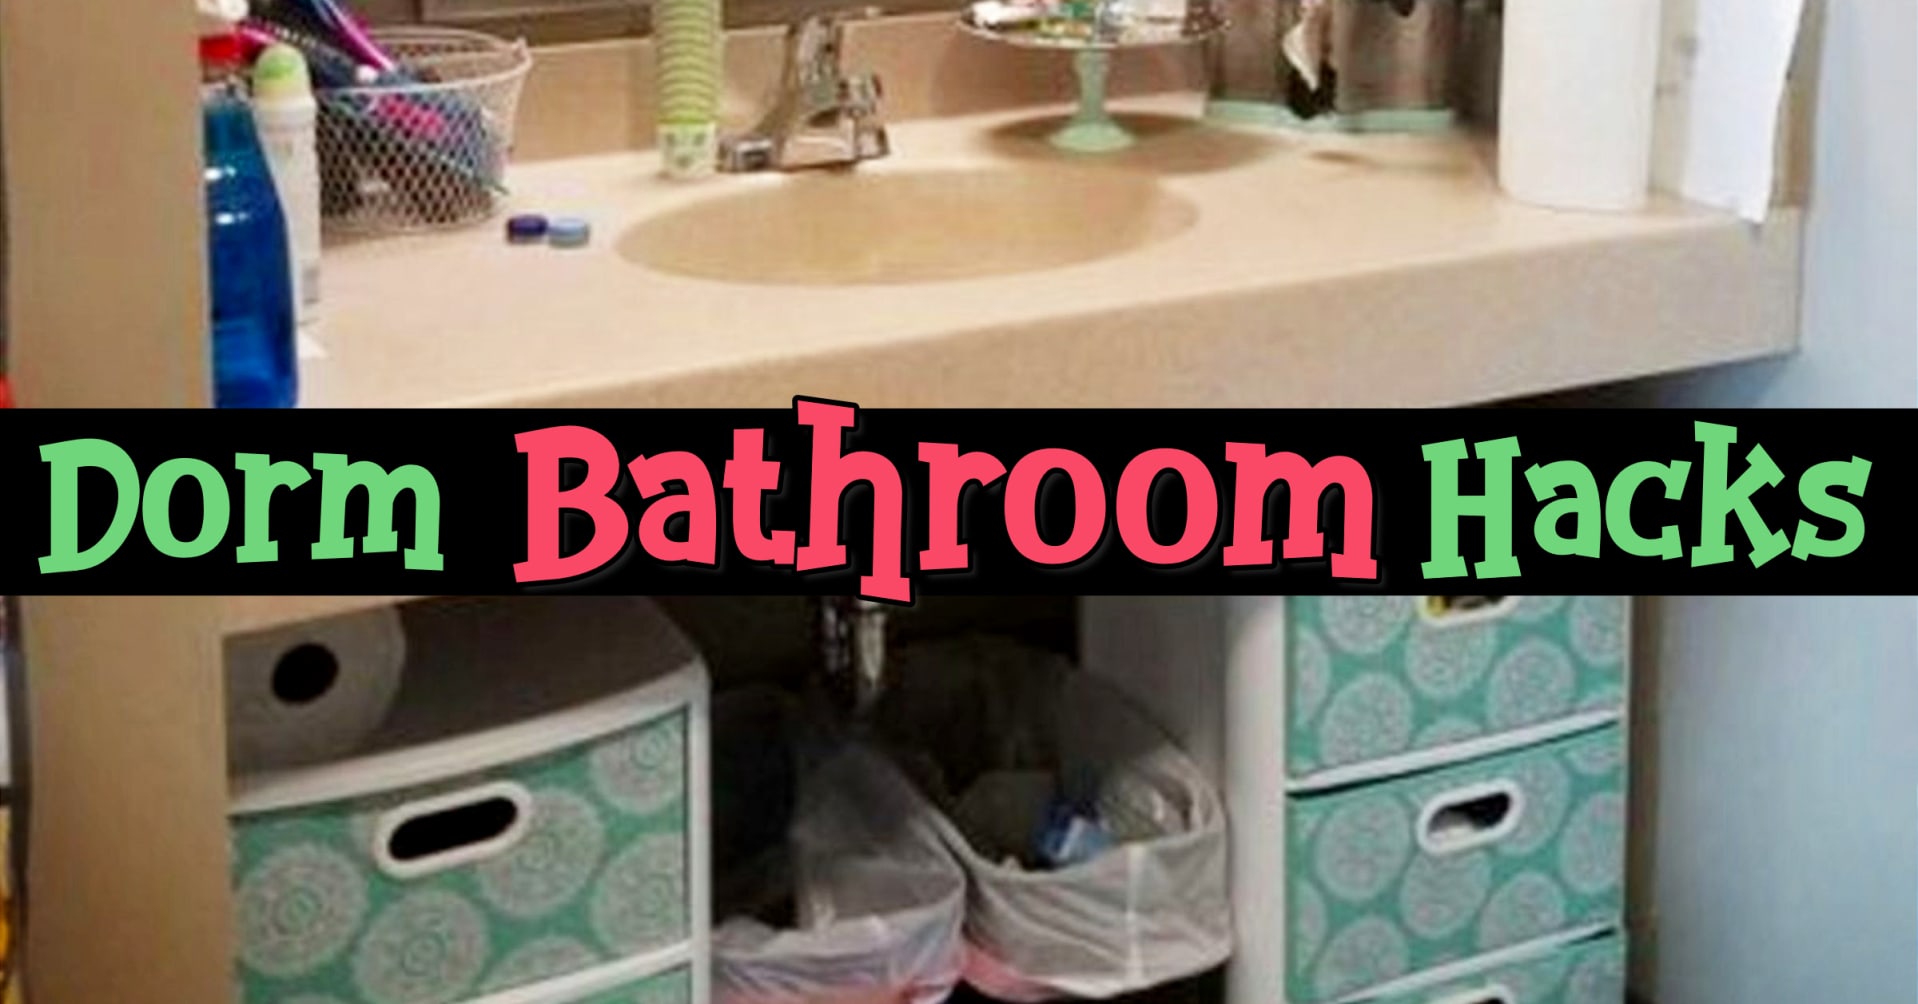 Small bathroom ideas - dorm bathroom storage and organization ideas for college community bathrooms, first apartment, shared bathrooms, suitemate bathrooms with roommates and more dorm bathroom hacks, inspo and organizing ideas